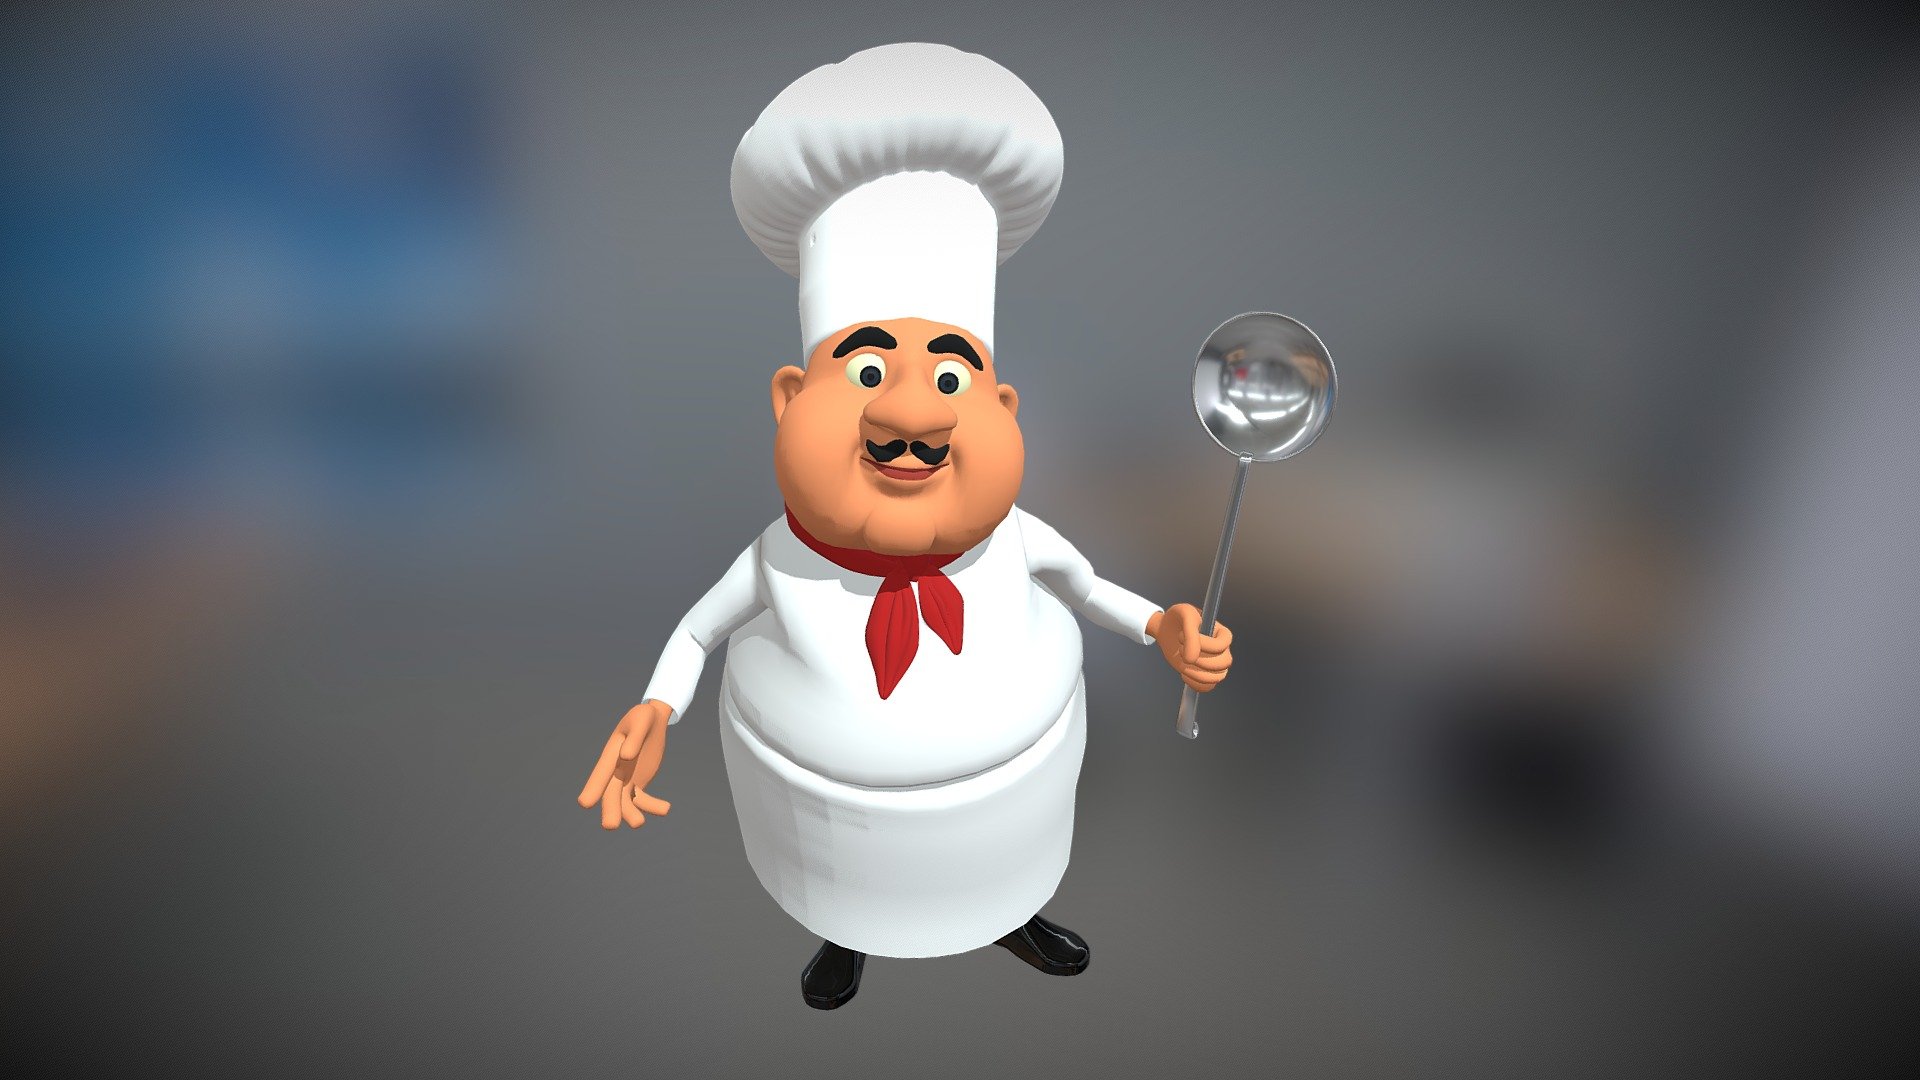 Chef Character Animated - Low Poly Game Ready

Optimized for games (game ready), Suitable for close-UPS, illustrations and various renderings 3d model